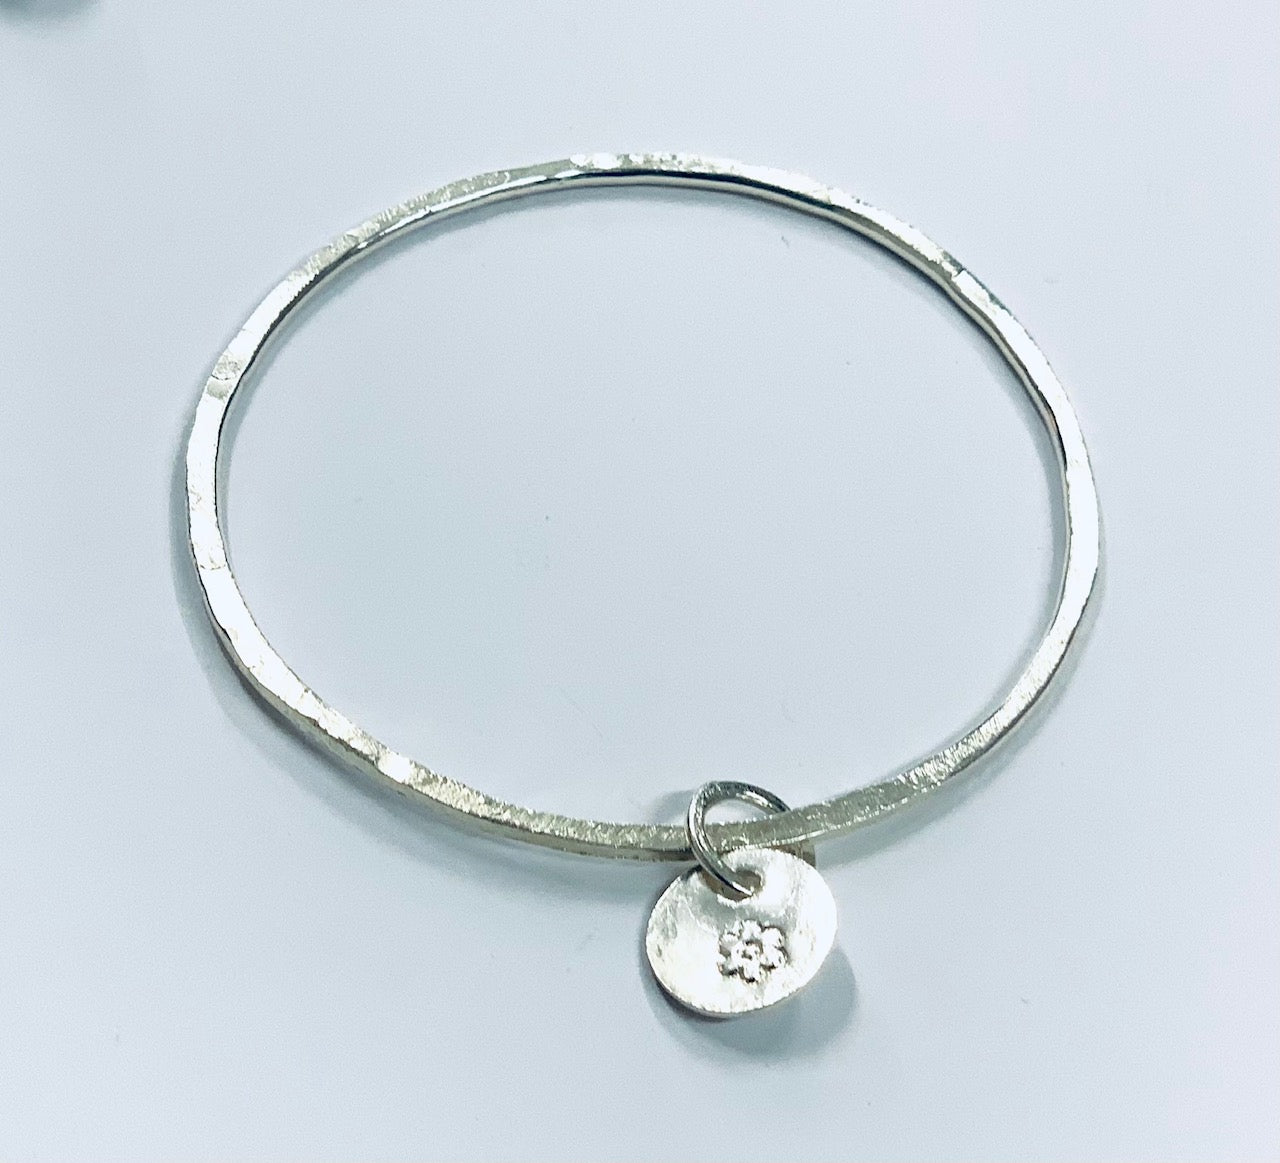 Thin silver bangle with round charm